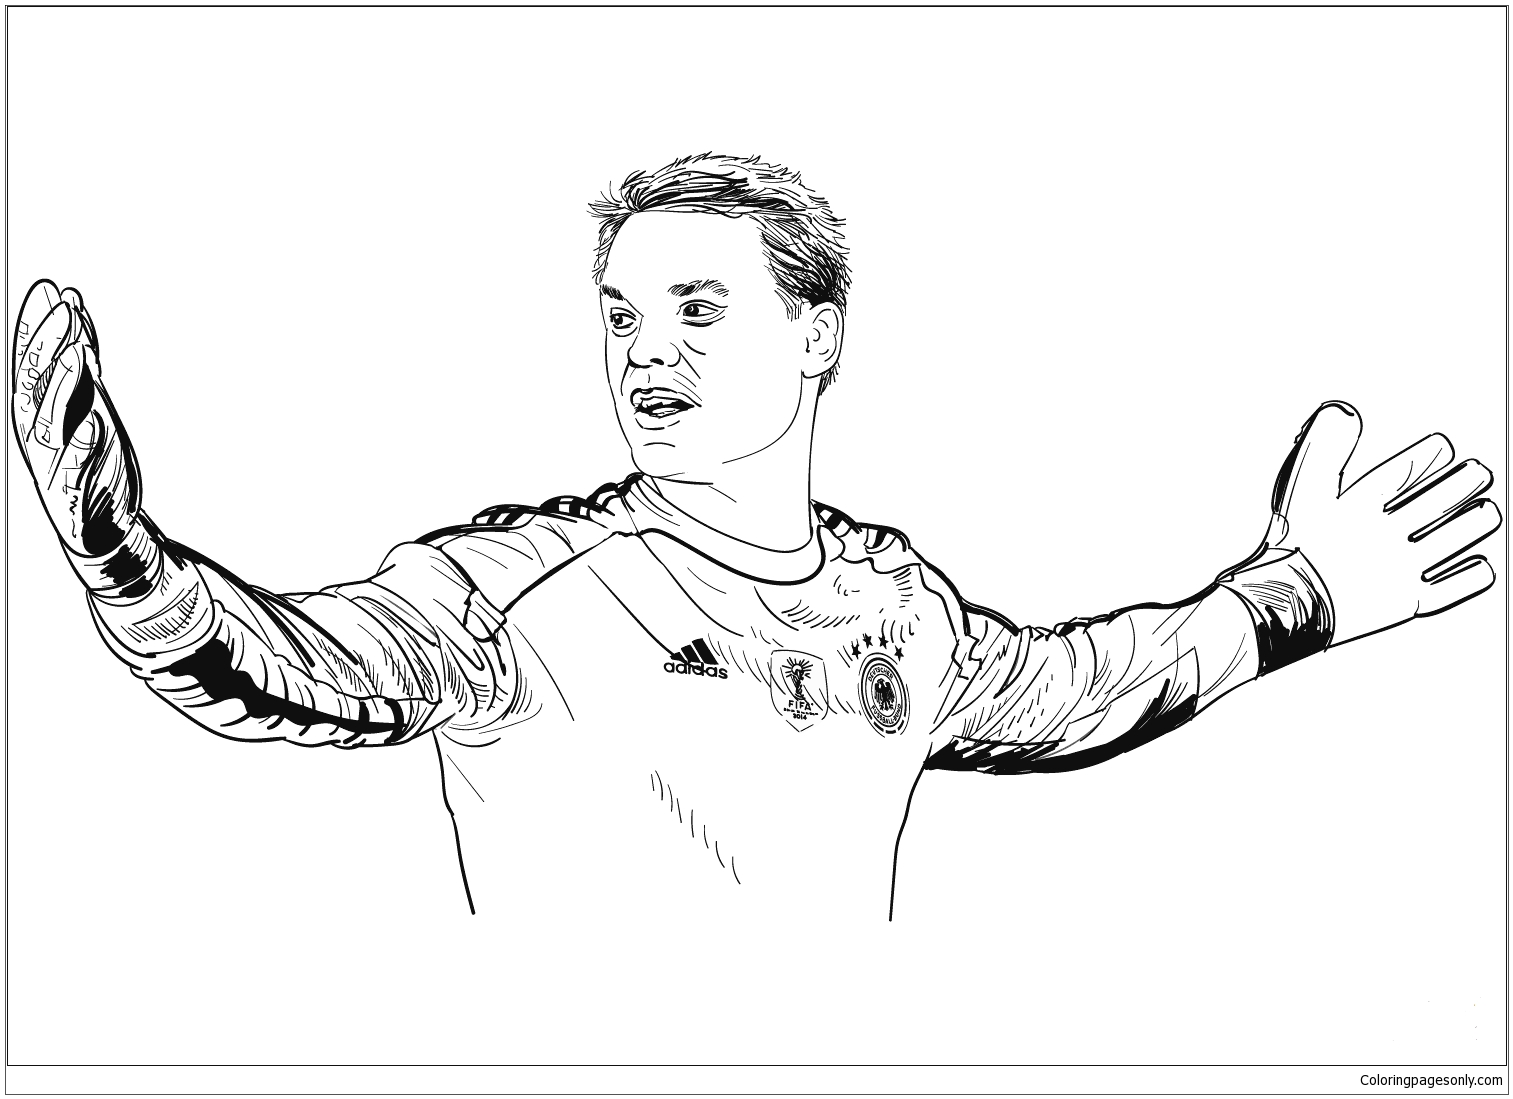 Manuel Neuer-image 1 Coloring Pages - Manuel Neuer Coloring Pages - Coloring  Pages For Kids And Adults